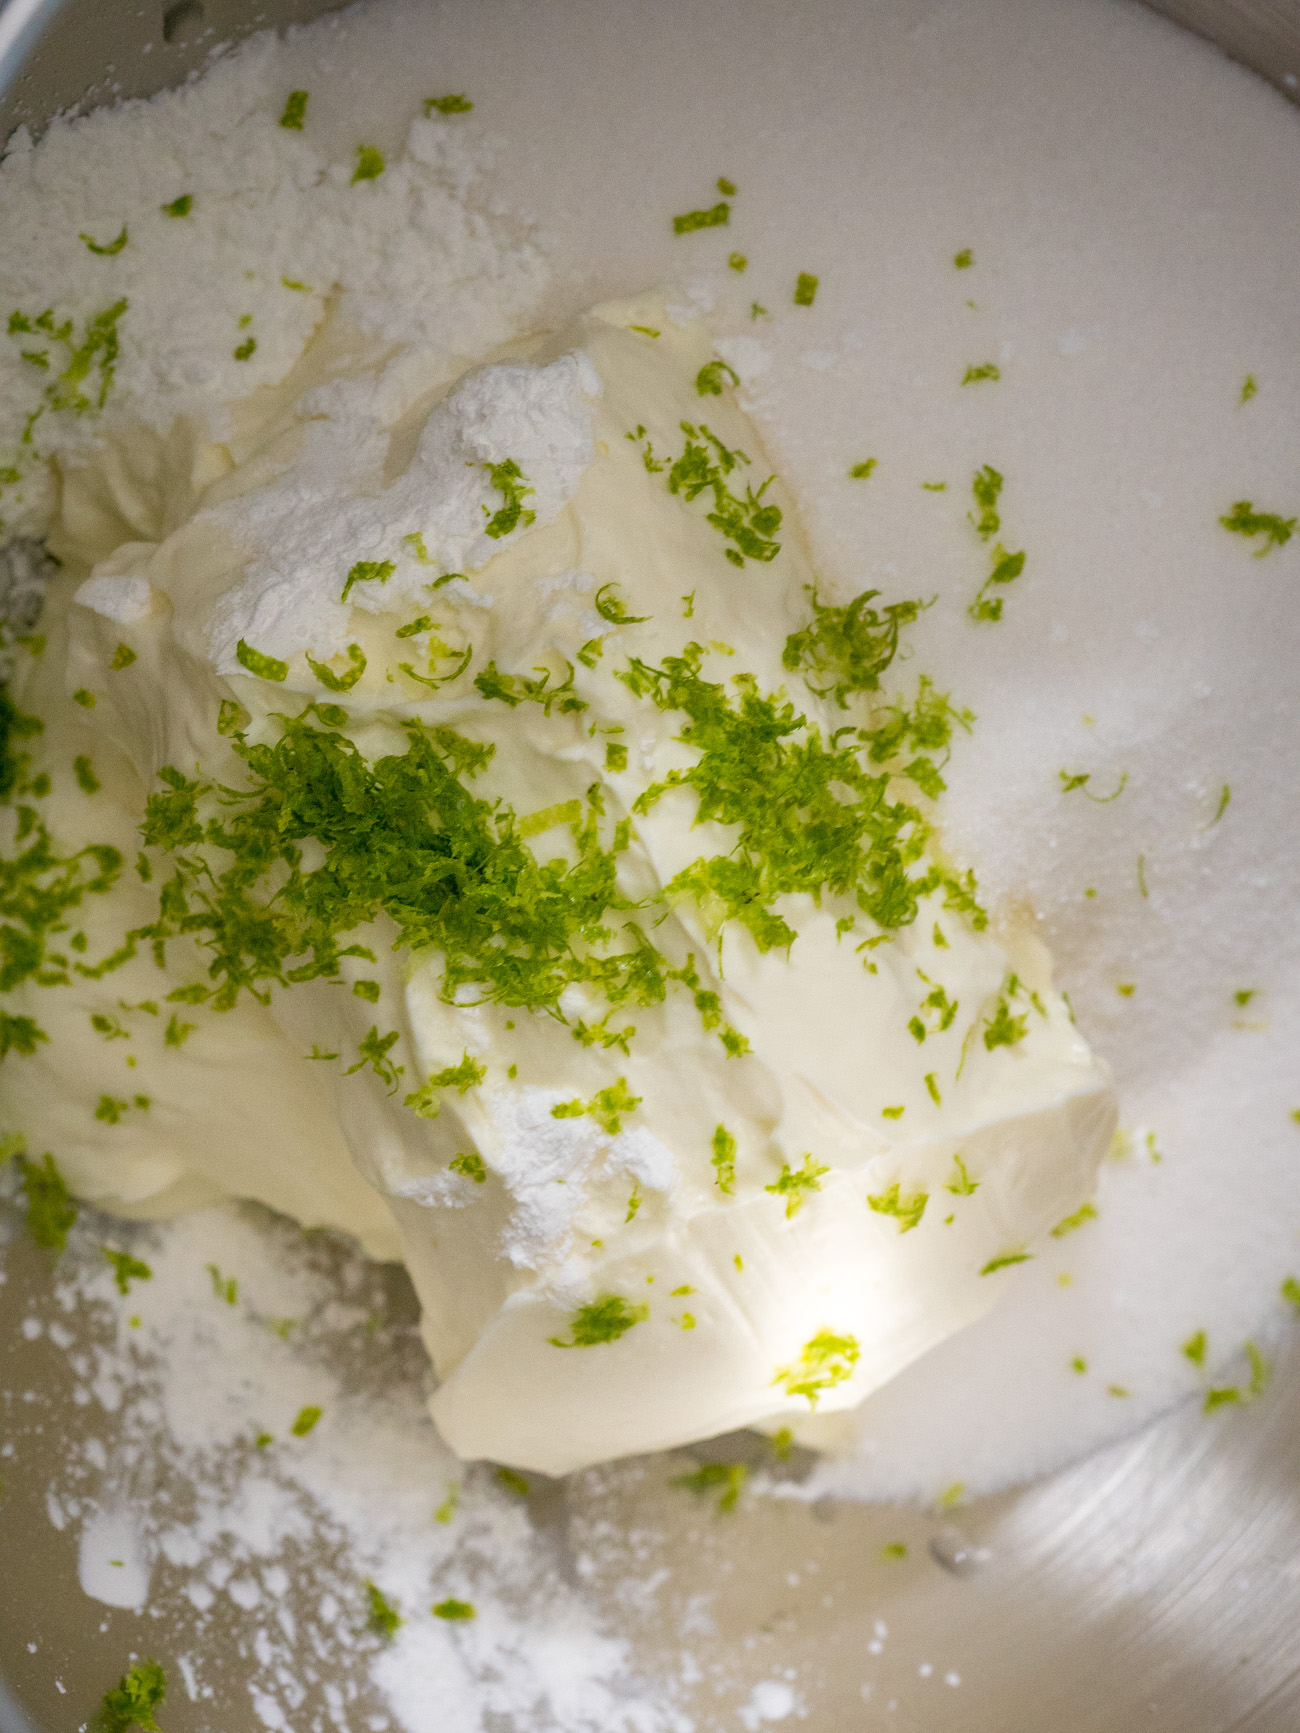 Beat the cream cheese, sugar, cornstarch, and lime zest together with an electric mixer until smooth and creamy.